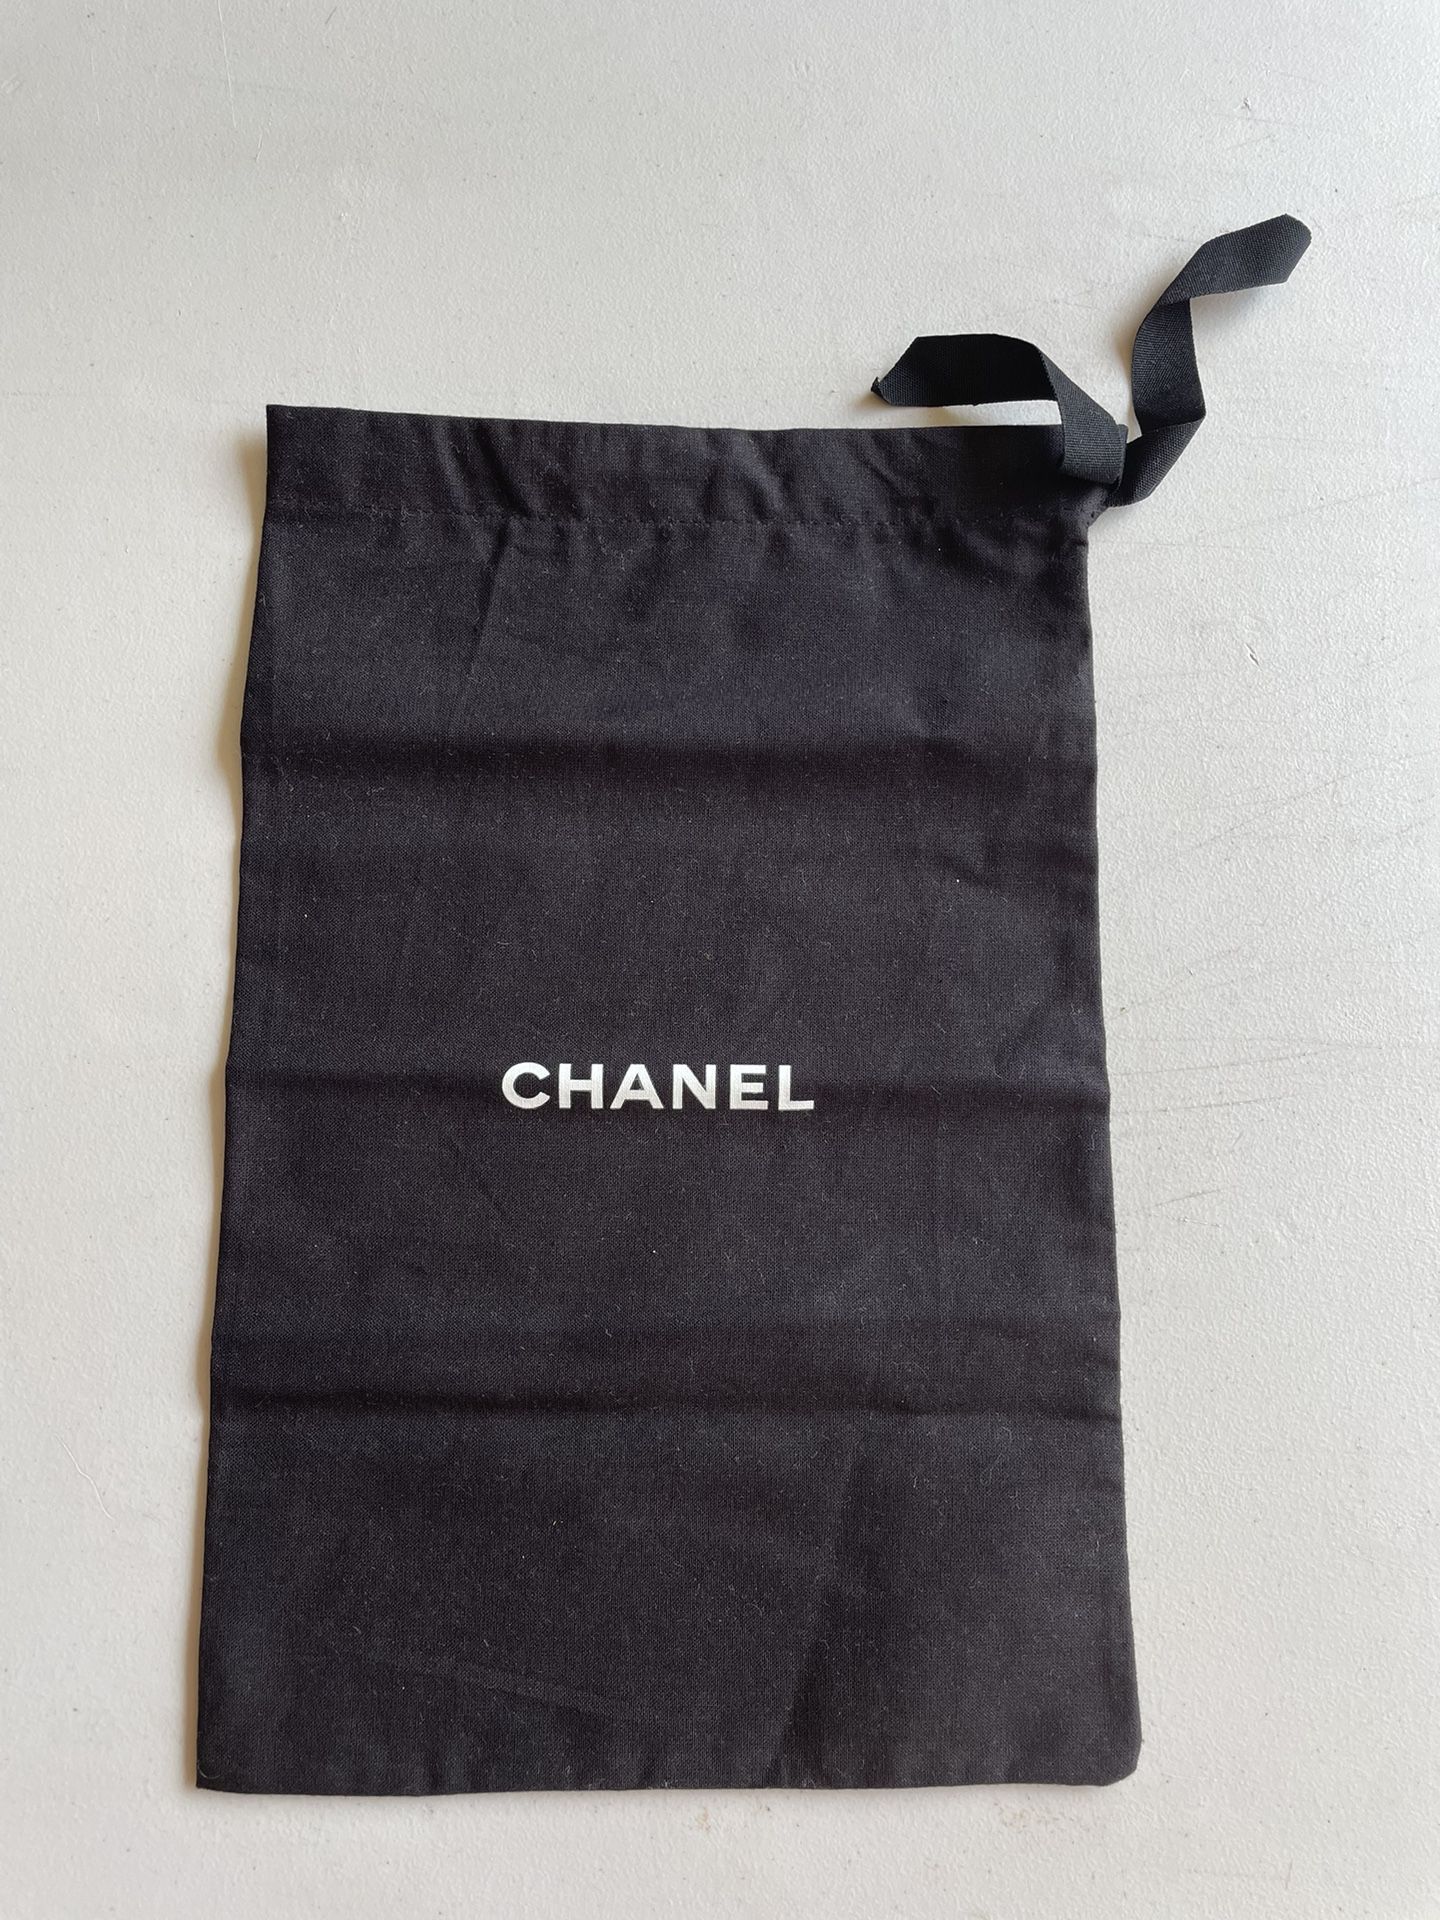 Chanel Black Dust Bag Travel Case Protective Cover Clutch